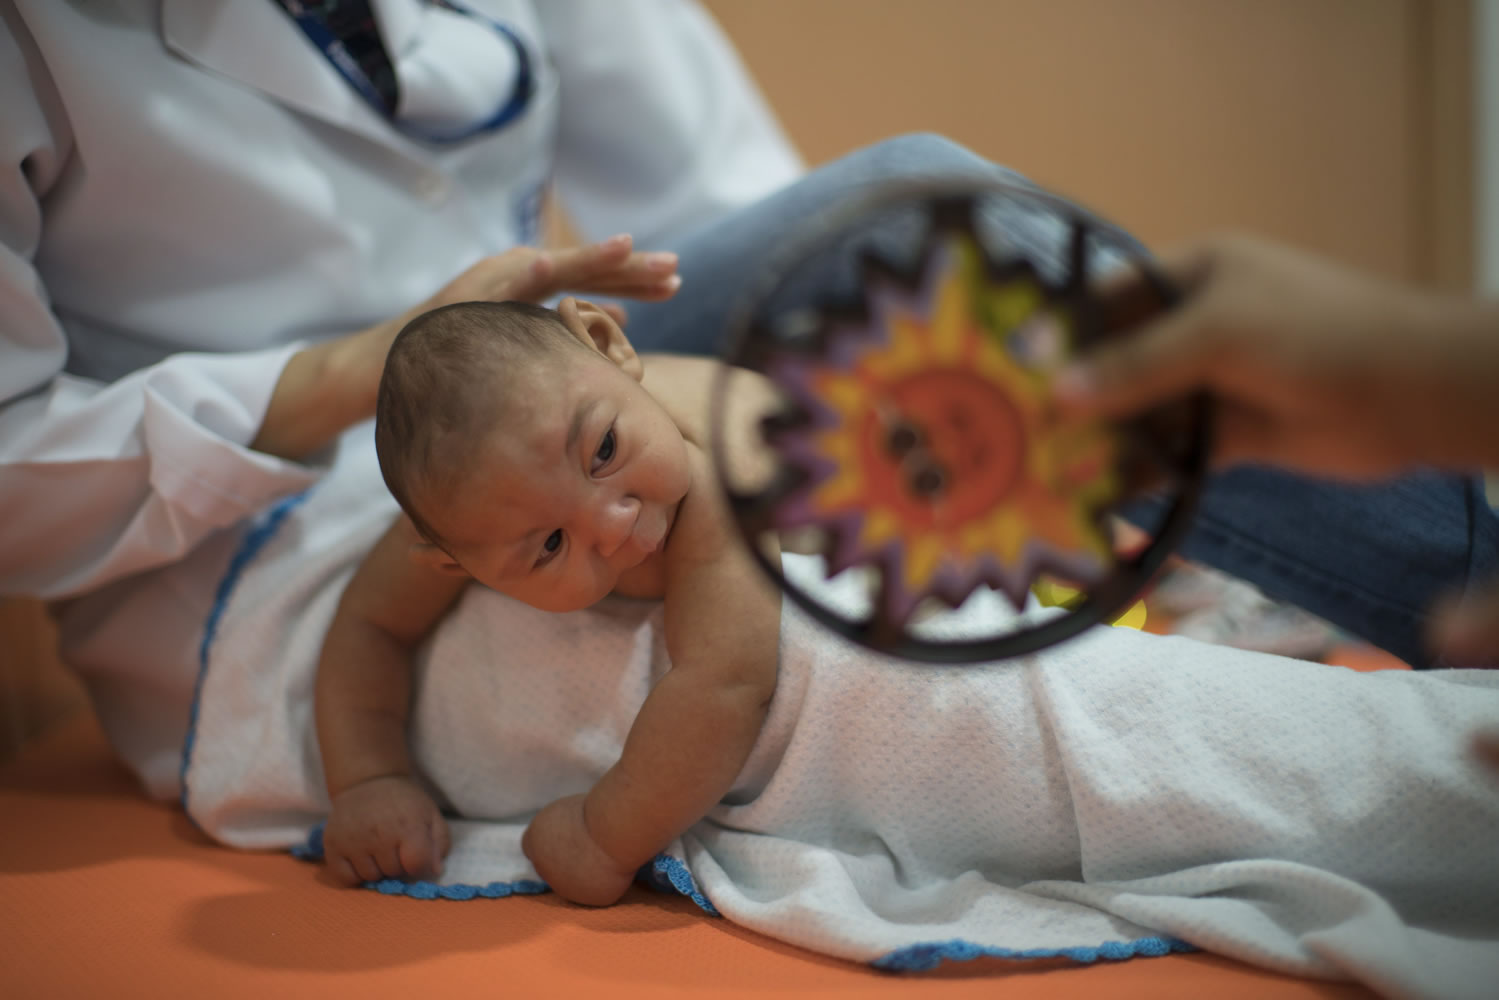 Three-month-old Daniel, who was born with microcephaly, undergoes physical therapy Thursday at the Altino Ventura Foundation in Recife, Brazil.